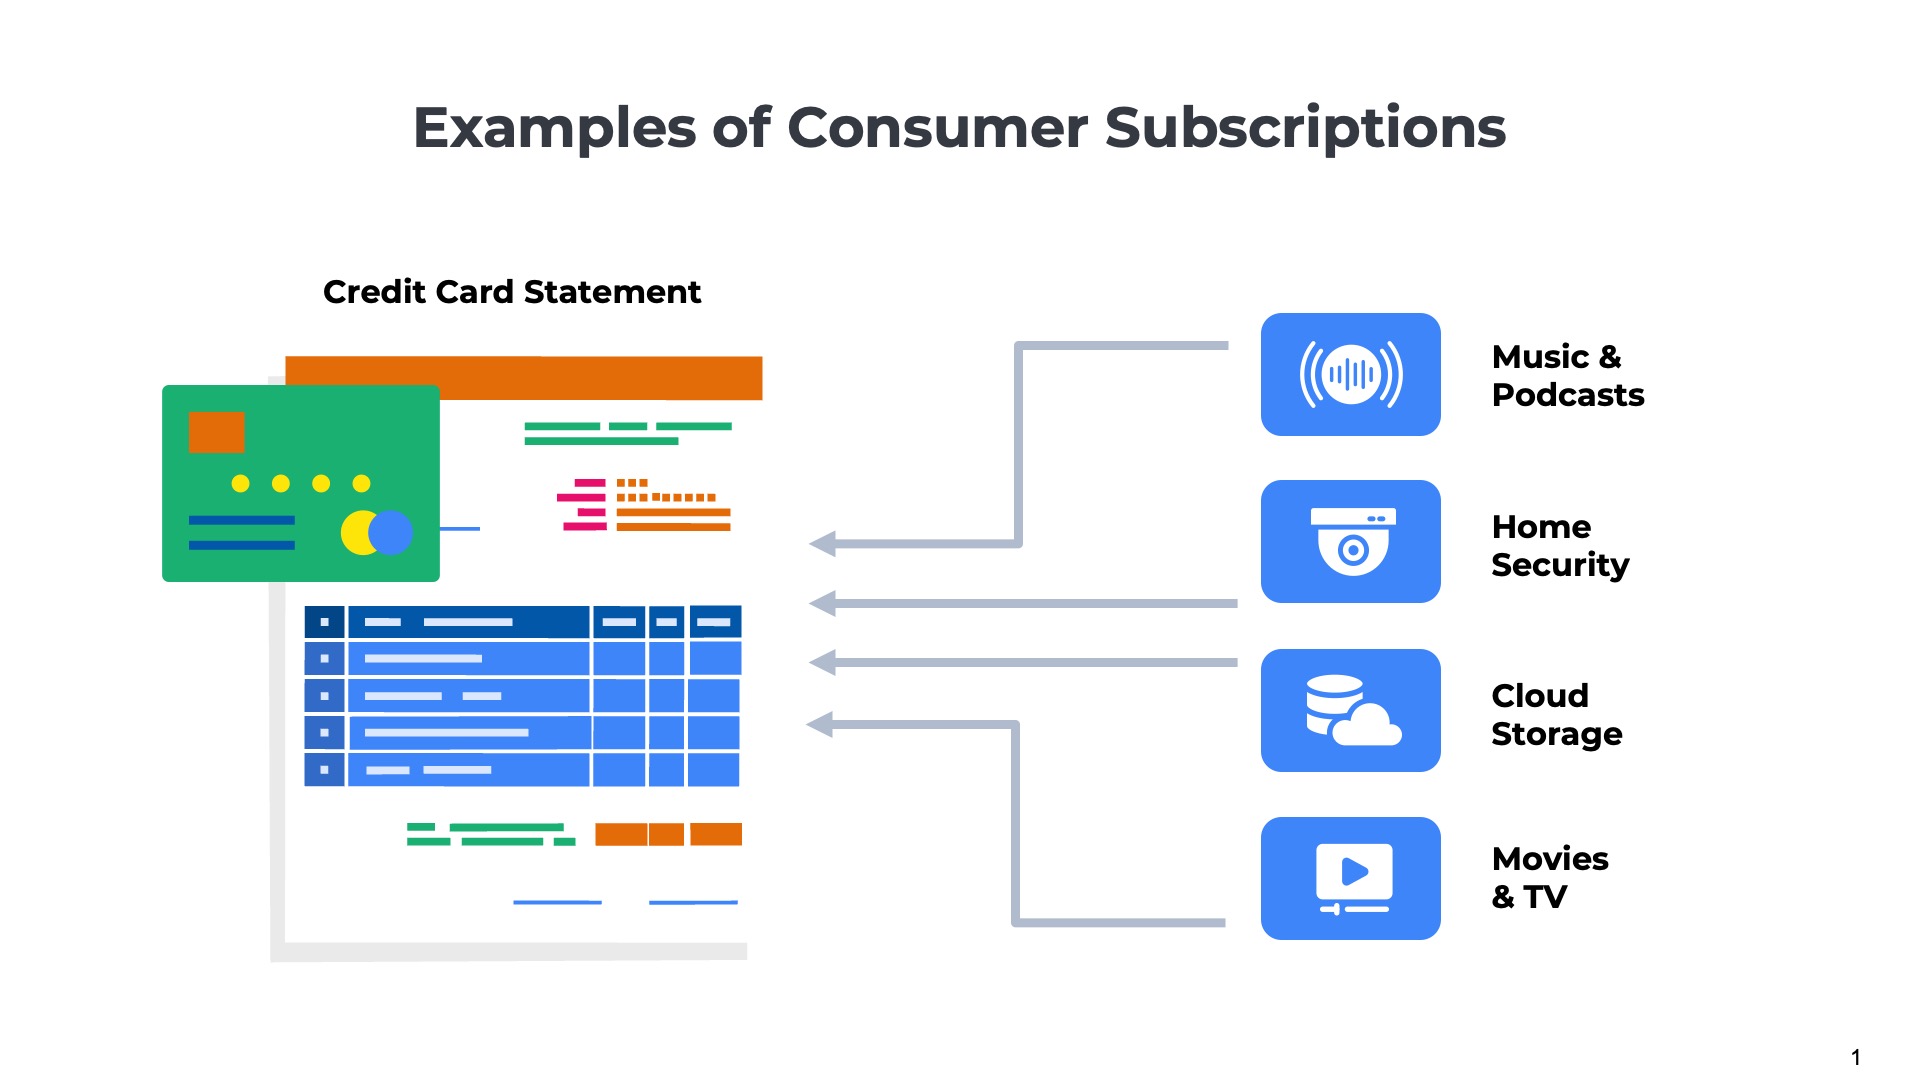 illustration of a credit card statement with four charges for music streaming, home security, cloud storage, tv streaming subscriptions